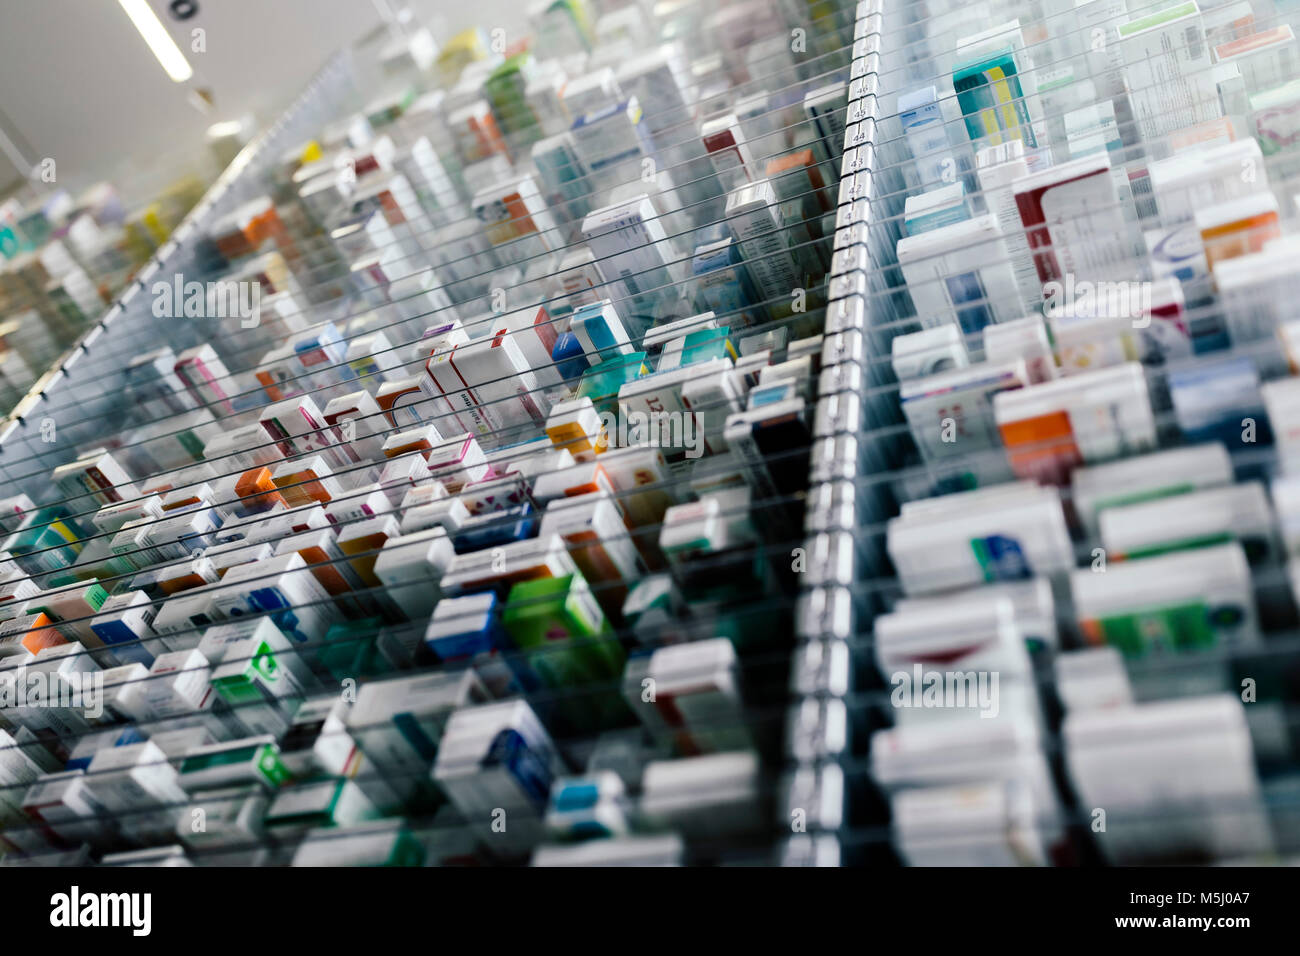 Medicine in shelves in commissioning machine in pharmacy Stock Photo